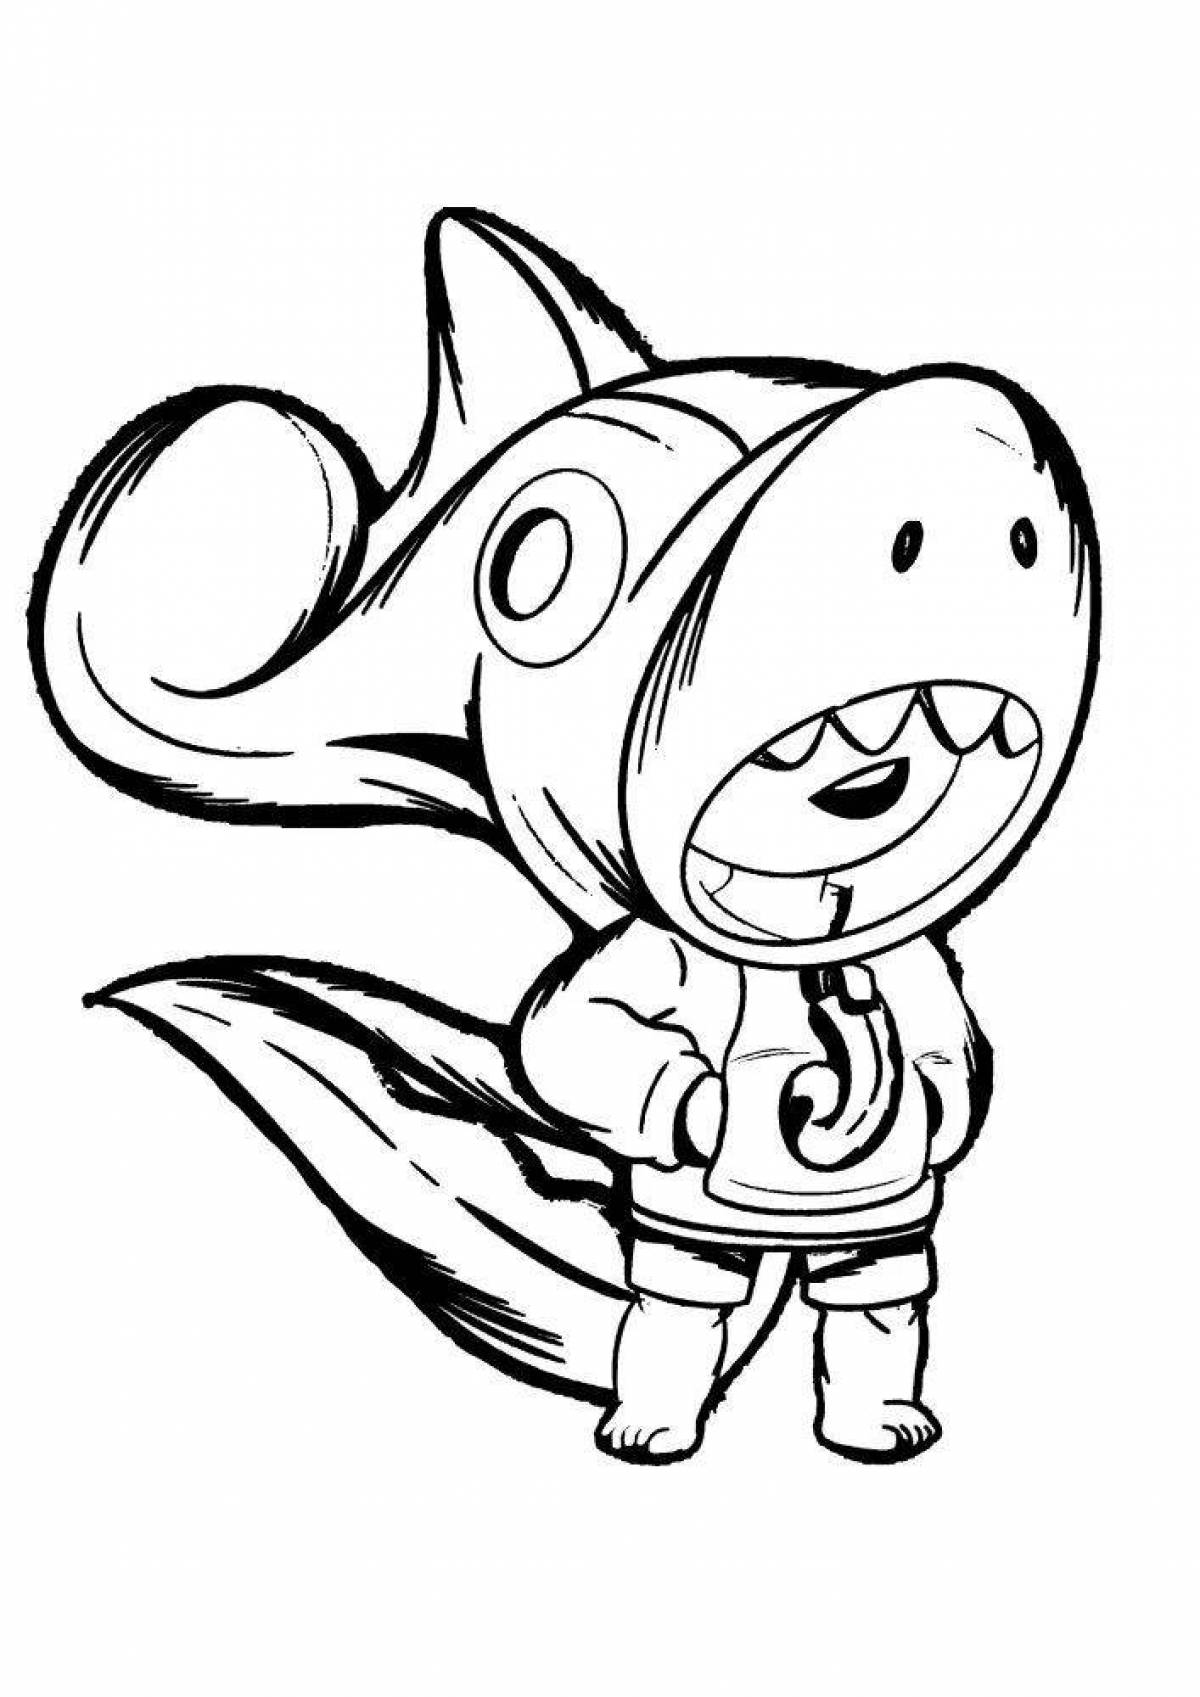 Leon shark coloring page